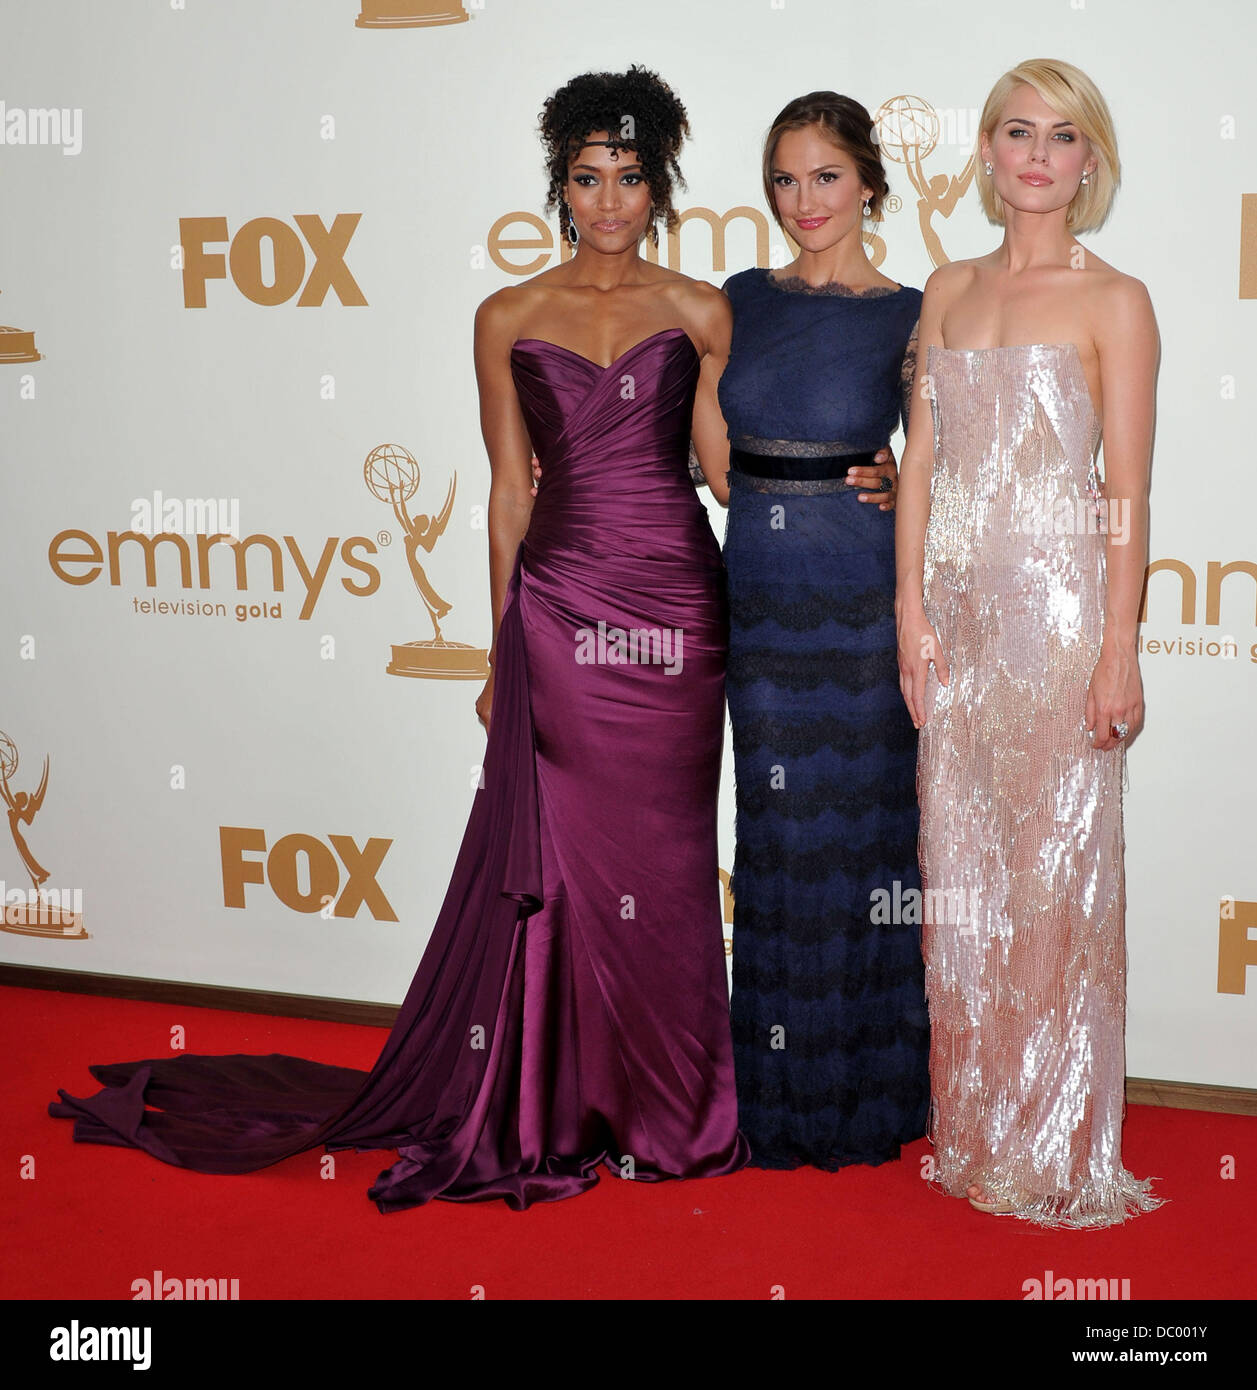 Minka Kelly, Rachael Taylor and Annie Ilonzeh The 63rd Primetime Emmy Awards, held at Nokia Theatre L.A. LIVE - Arrivals. Los Angeles, California - 18.09.11 Stock Photo